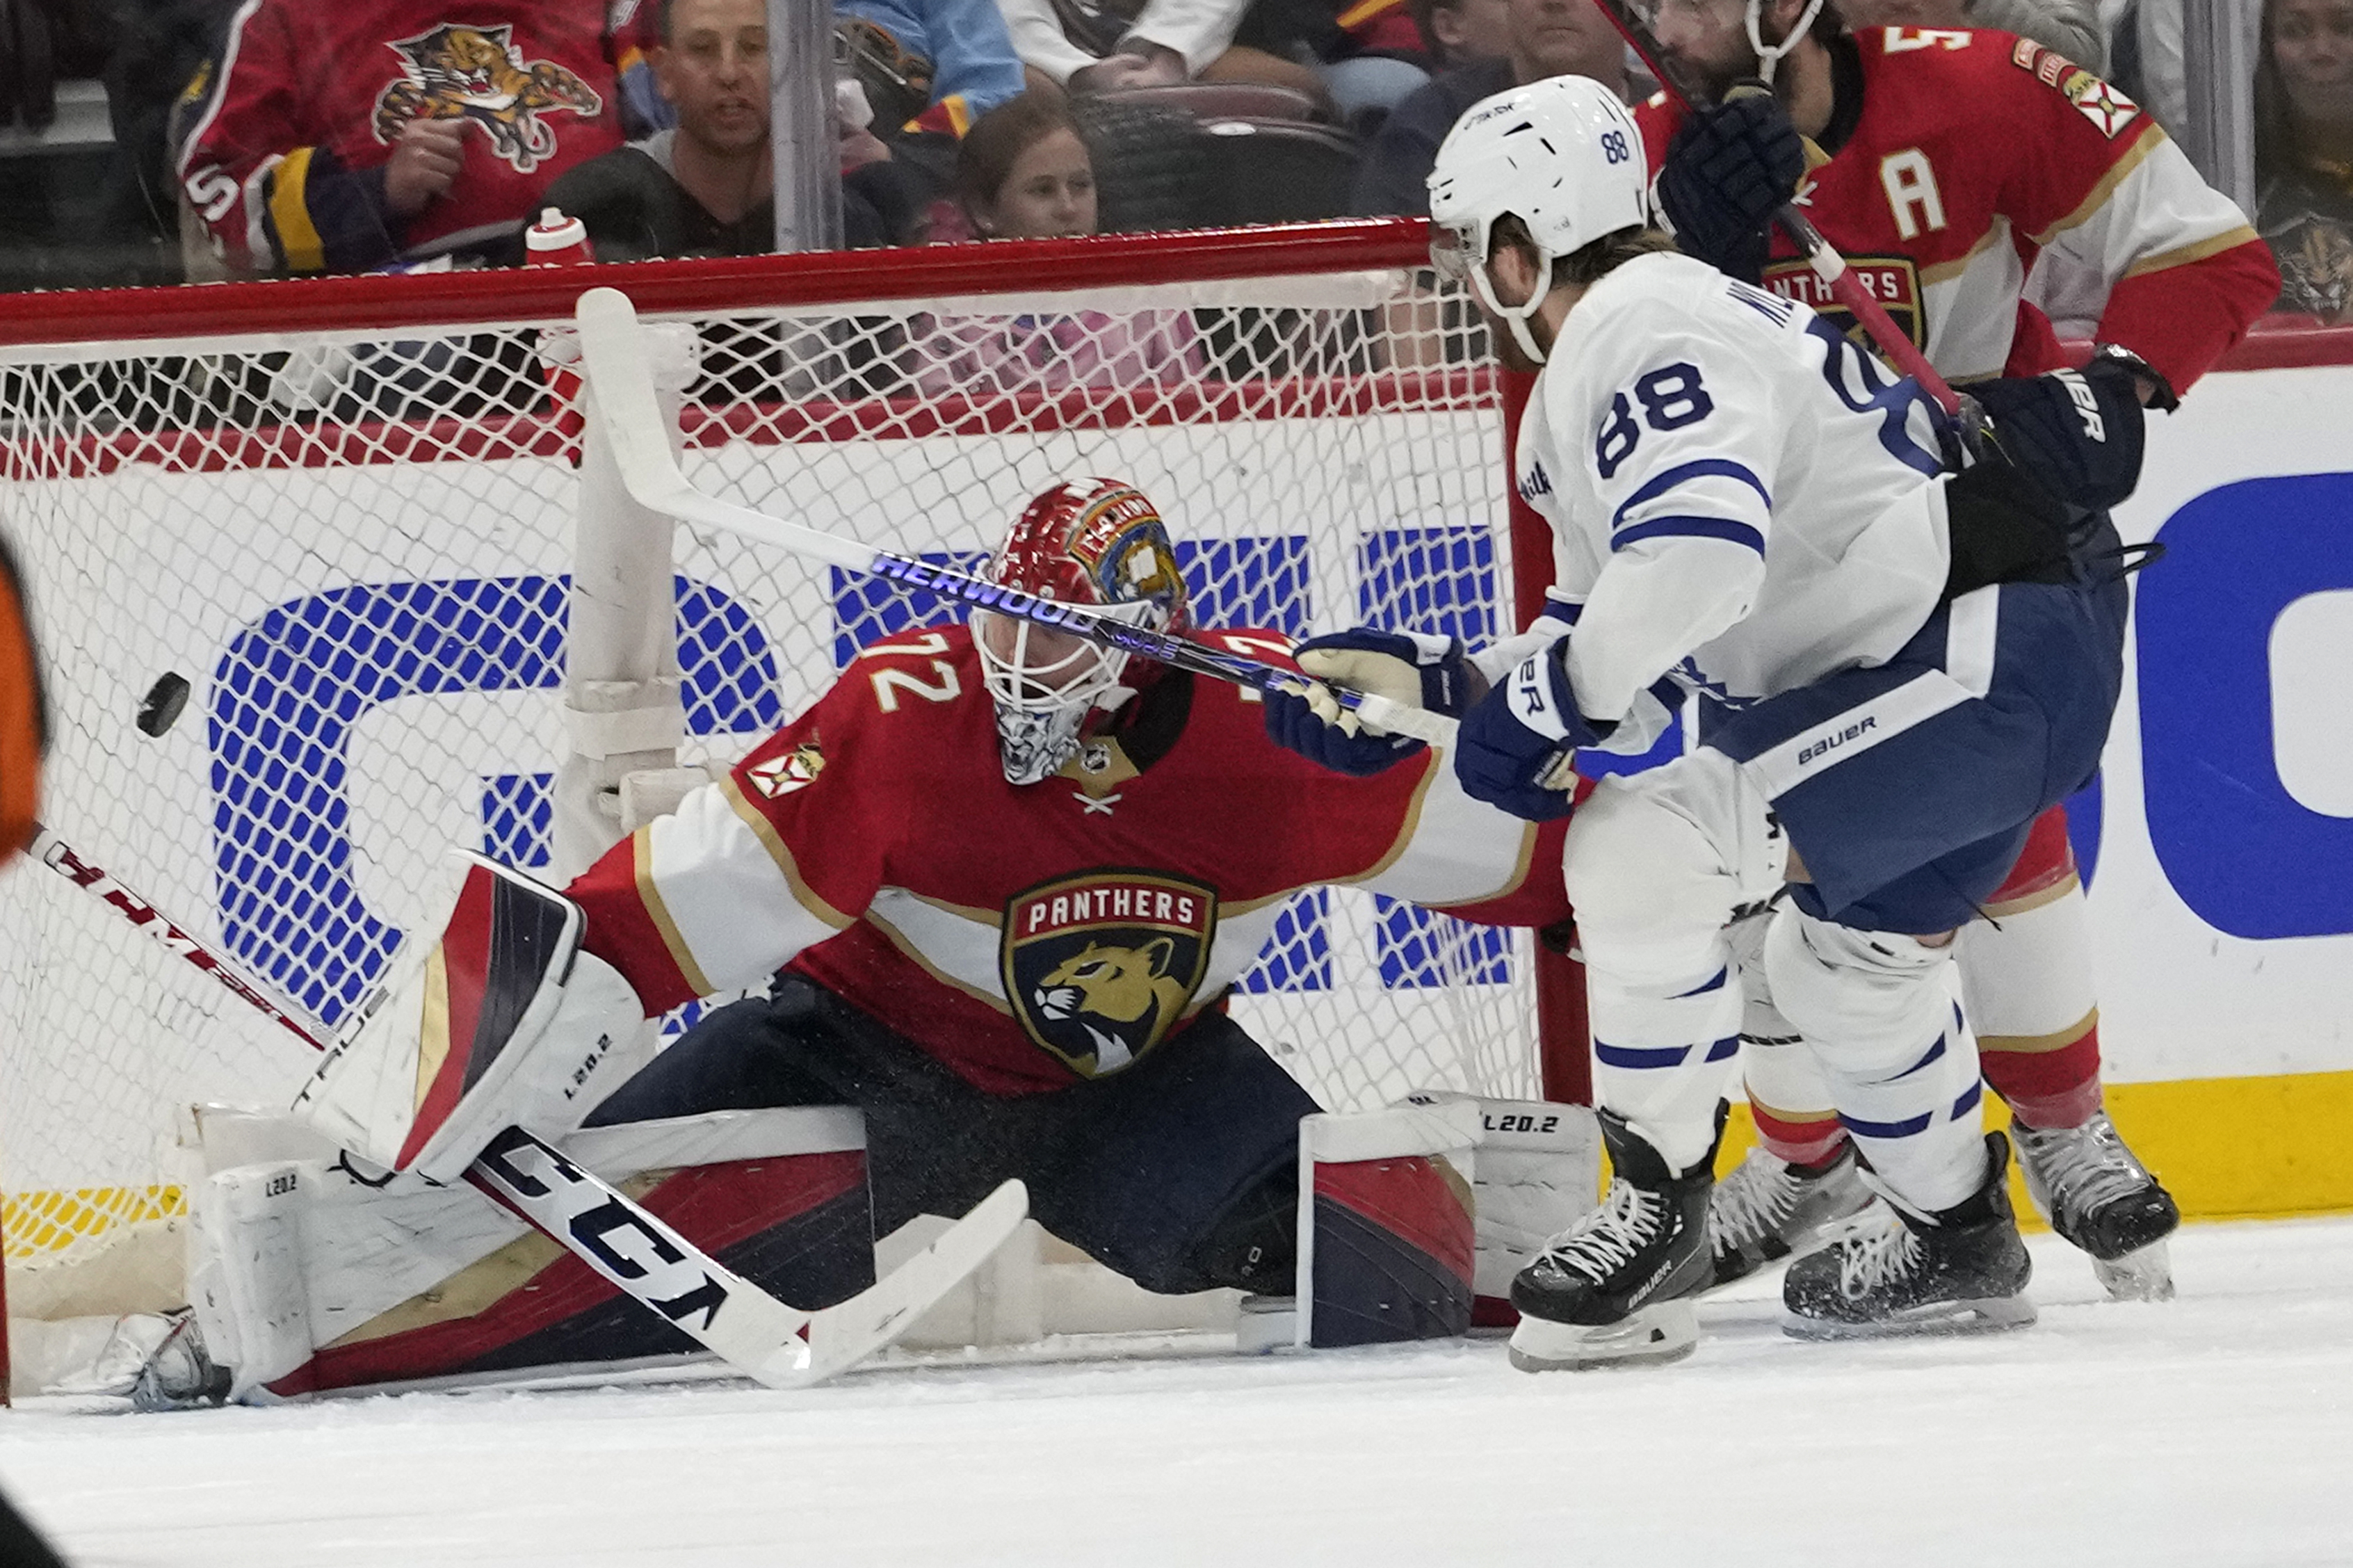 Toronto Maple Leafs avoid embarrassing sweep with 2-1 win over Florida Panthers